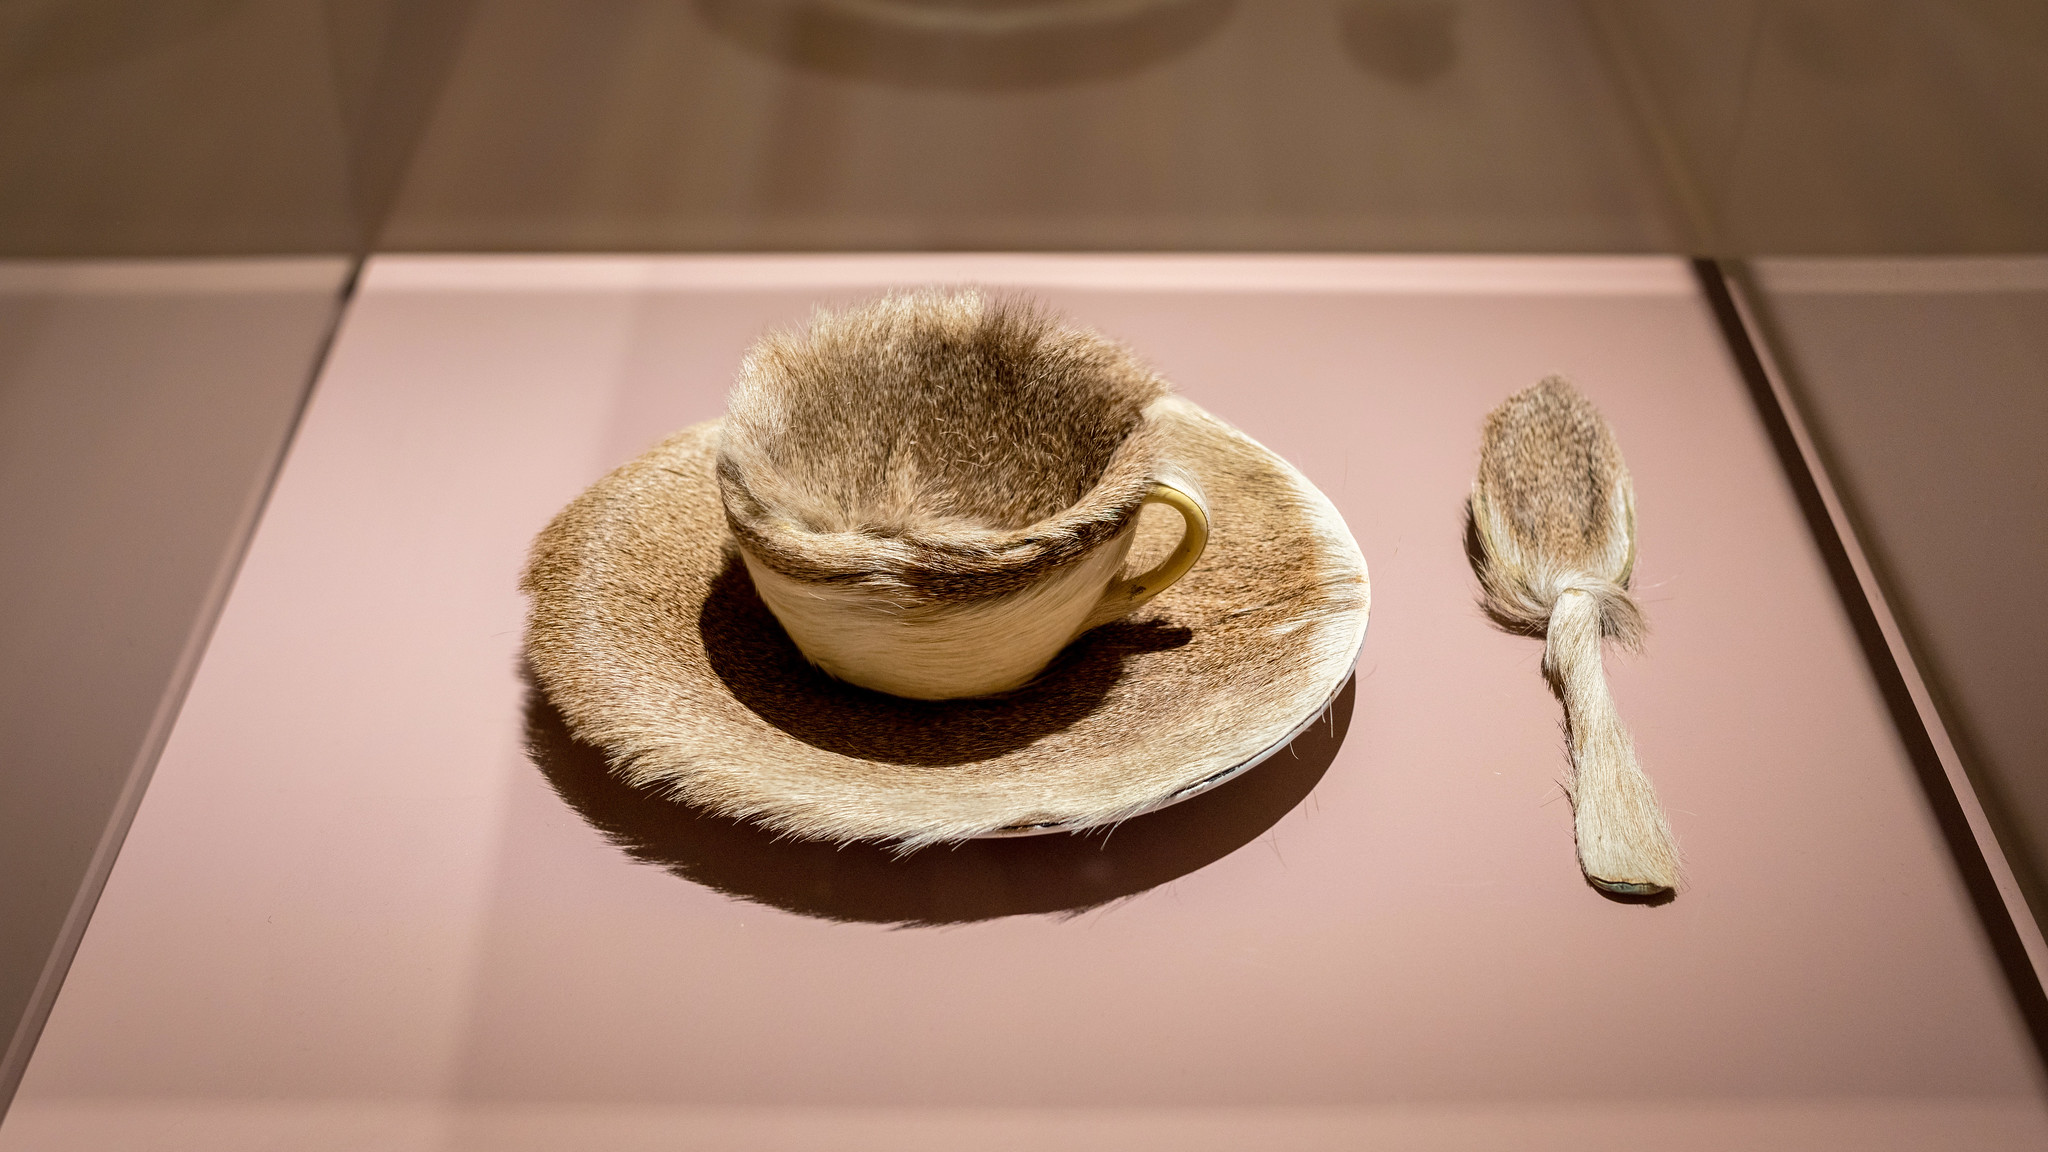 Meret Oppenheim, Object (Fur-covered cup, saucer, and spoon)